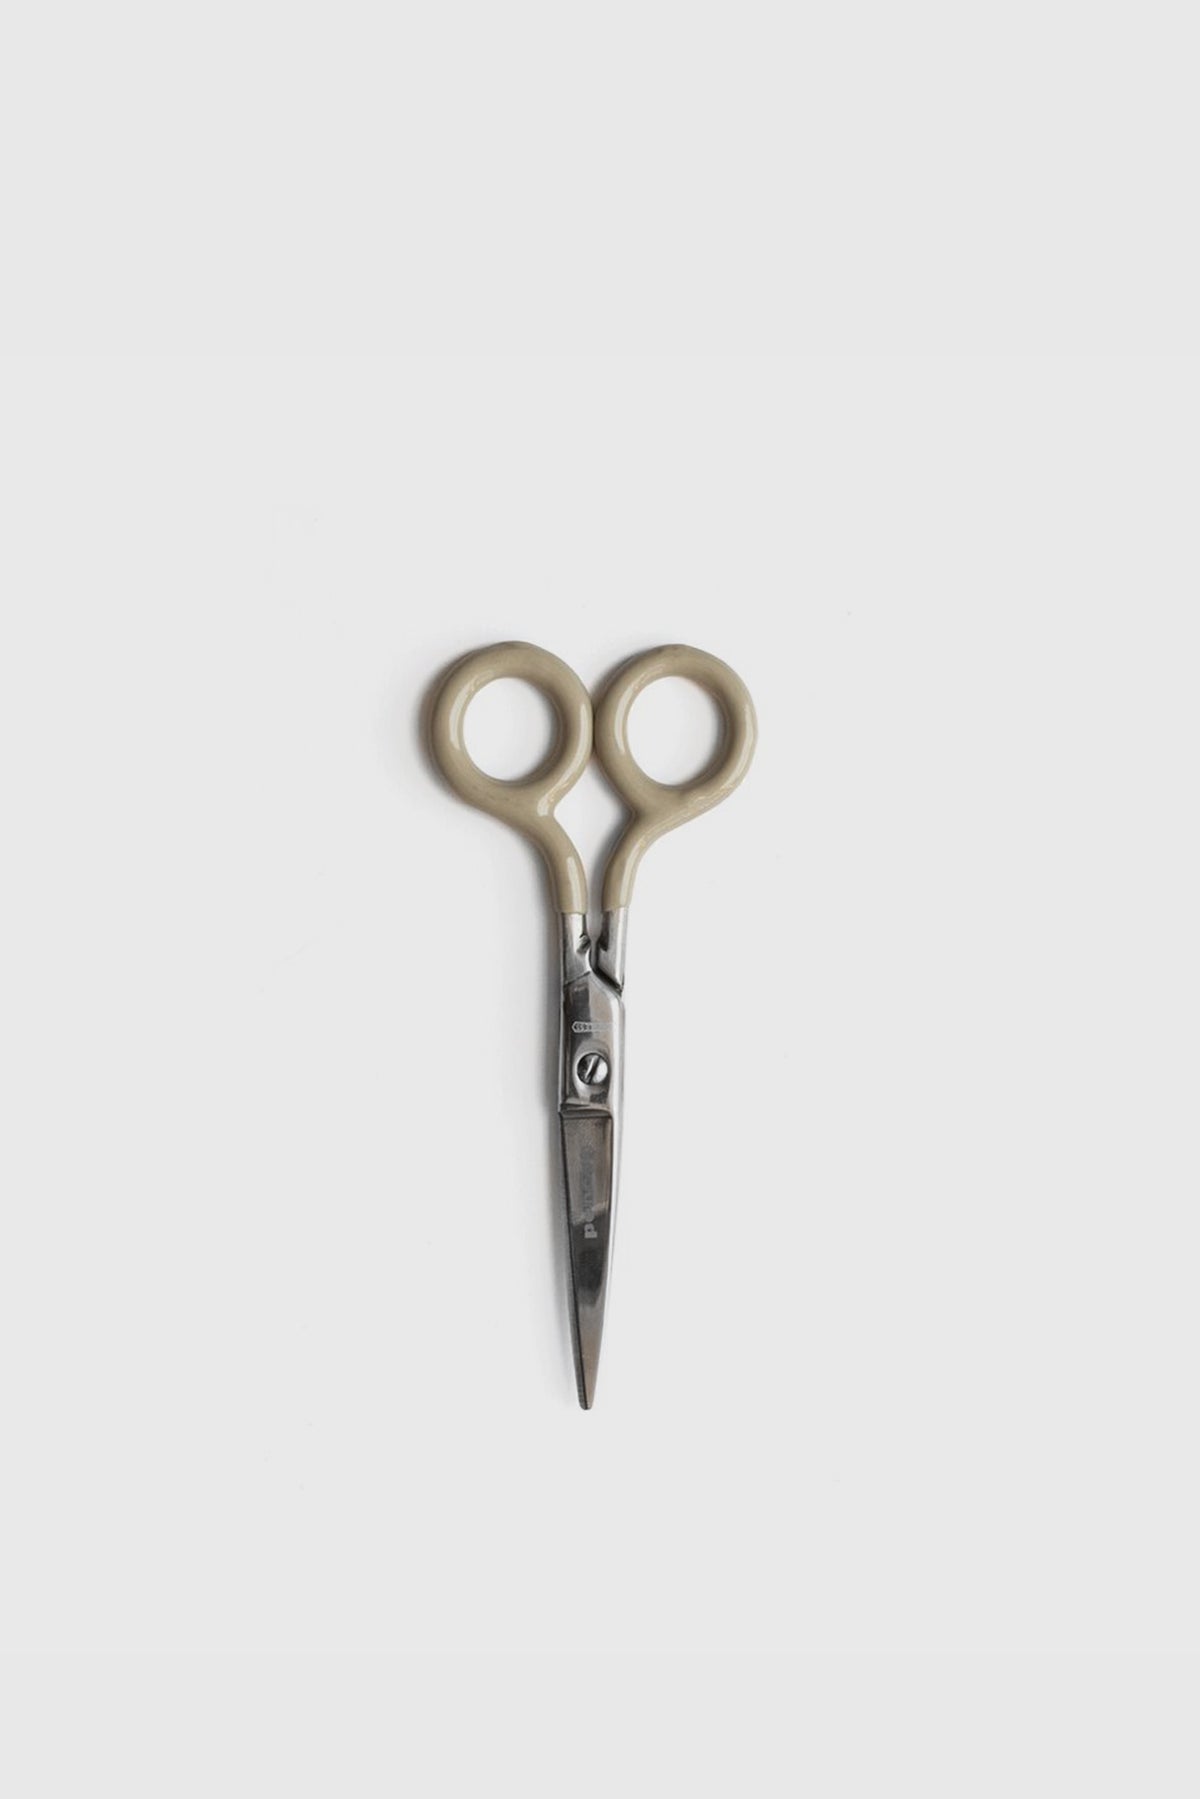 Ivory Stainless Scissors - Small - Marjolein Delhaas